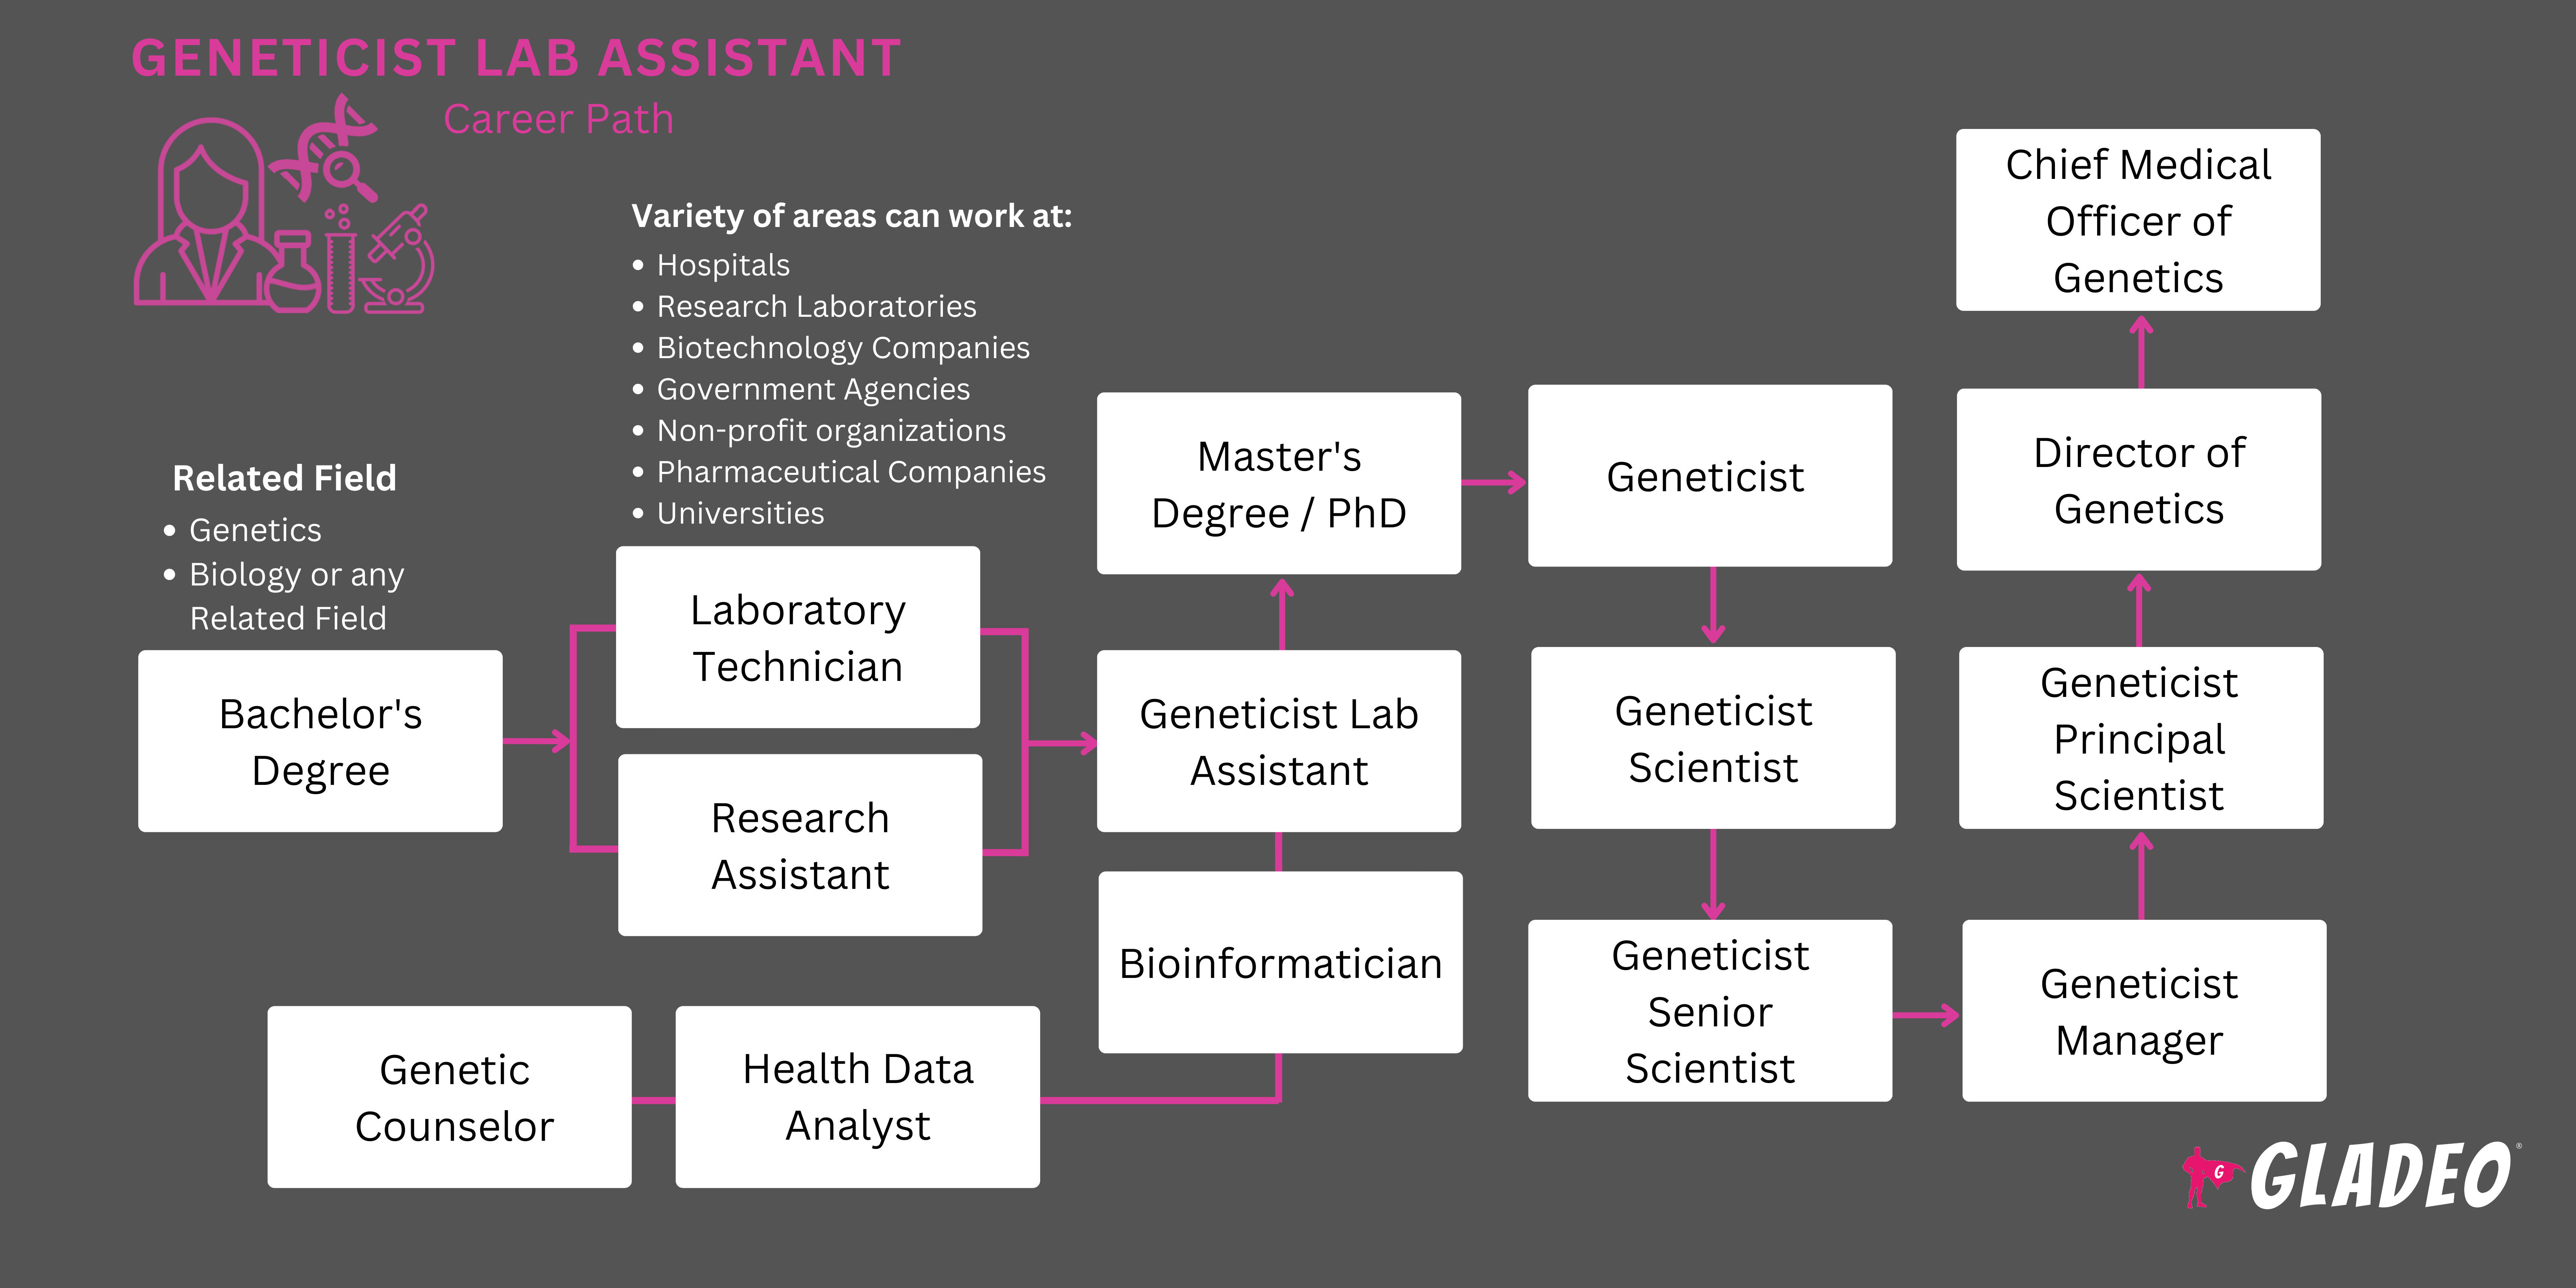 Roadmap ng Geneticist Lab Assistant